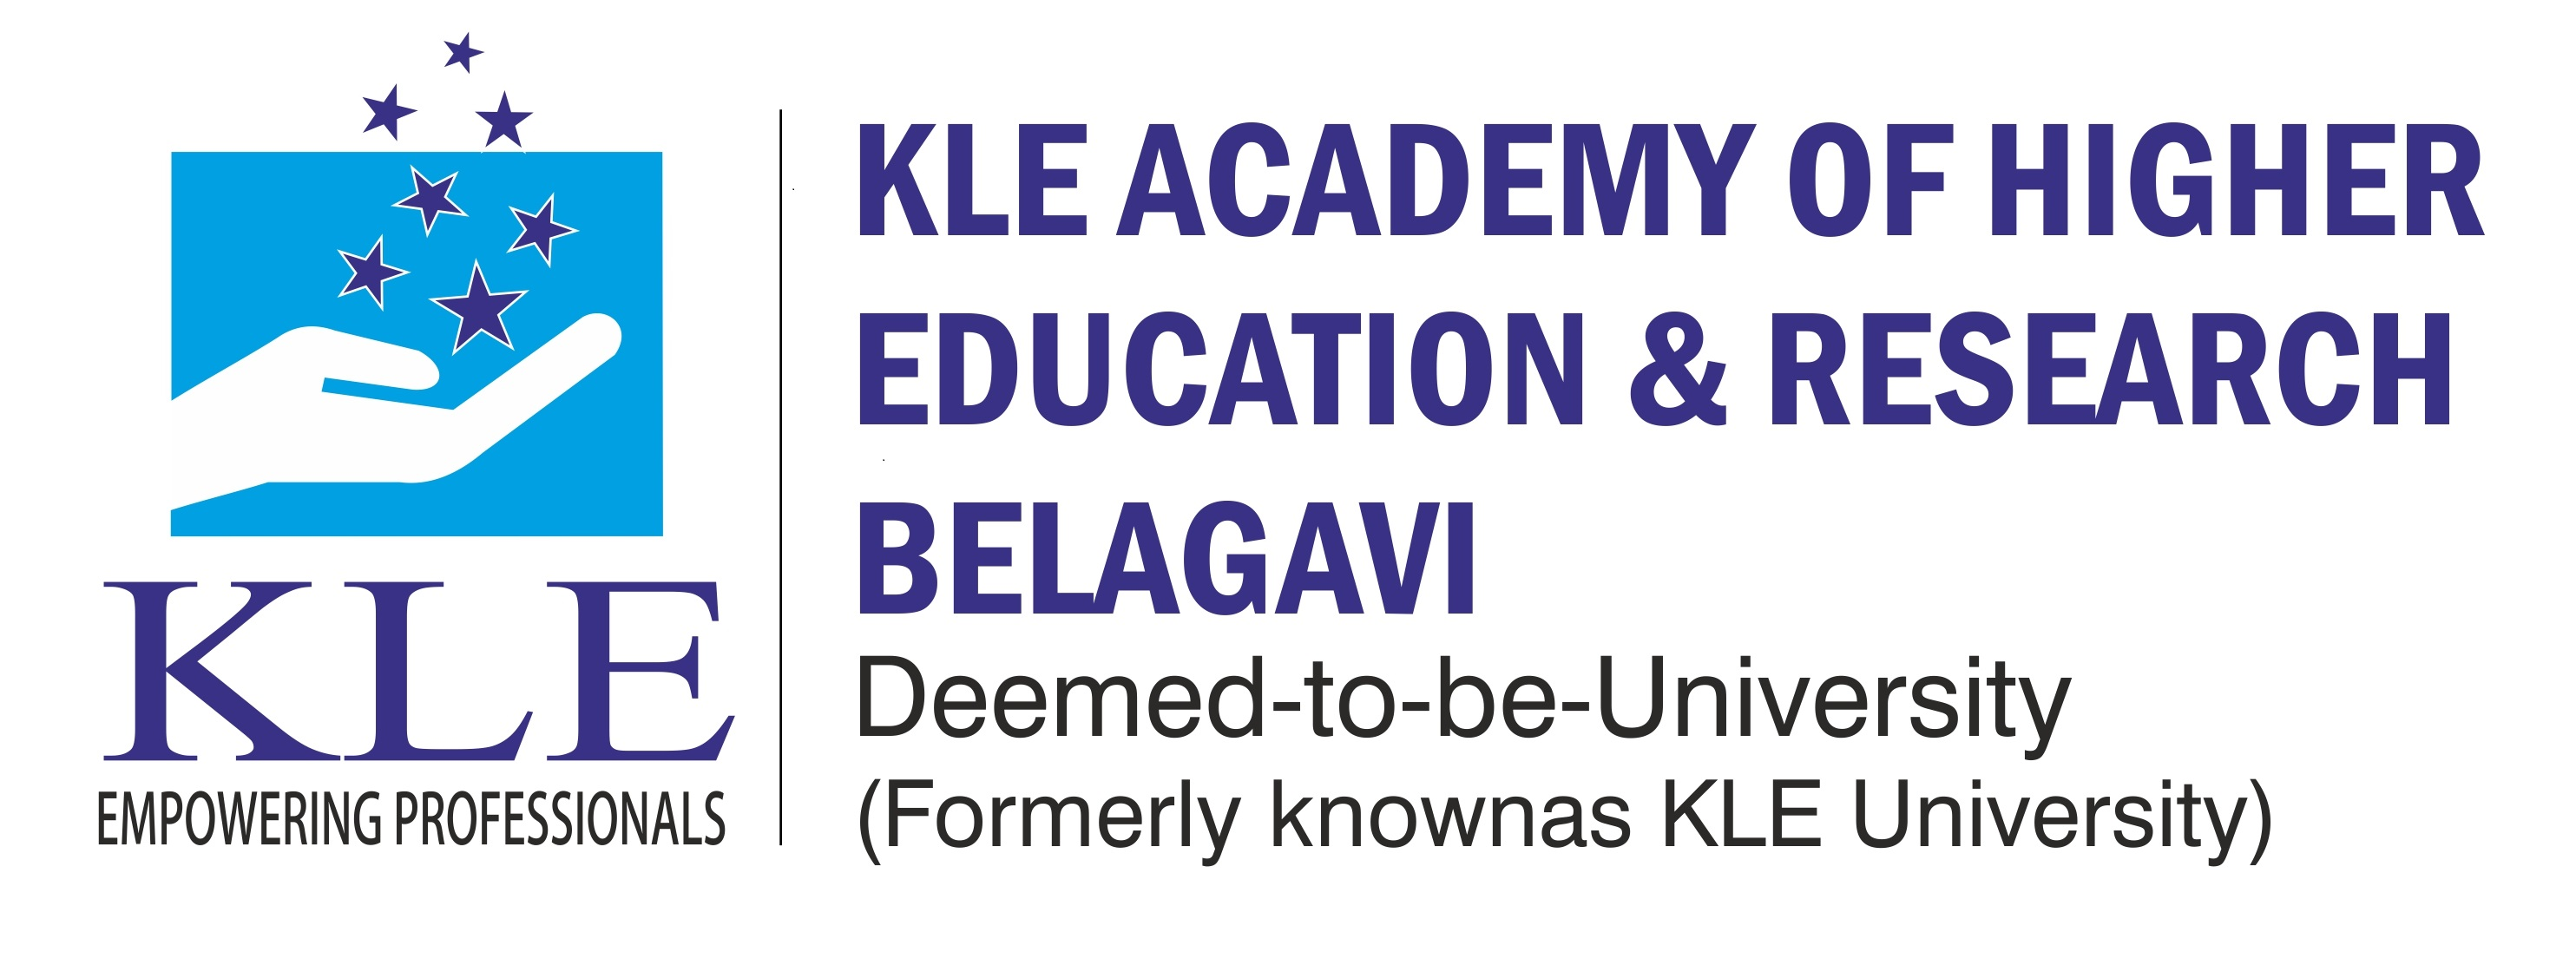 KLE Academy of Higher Education and Research – KLE University ...